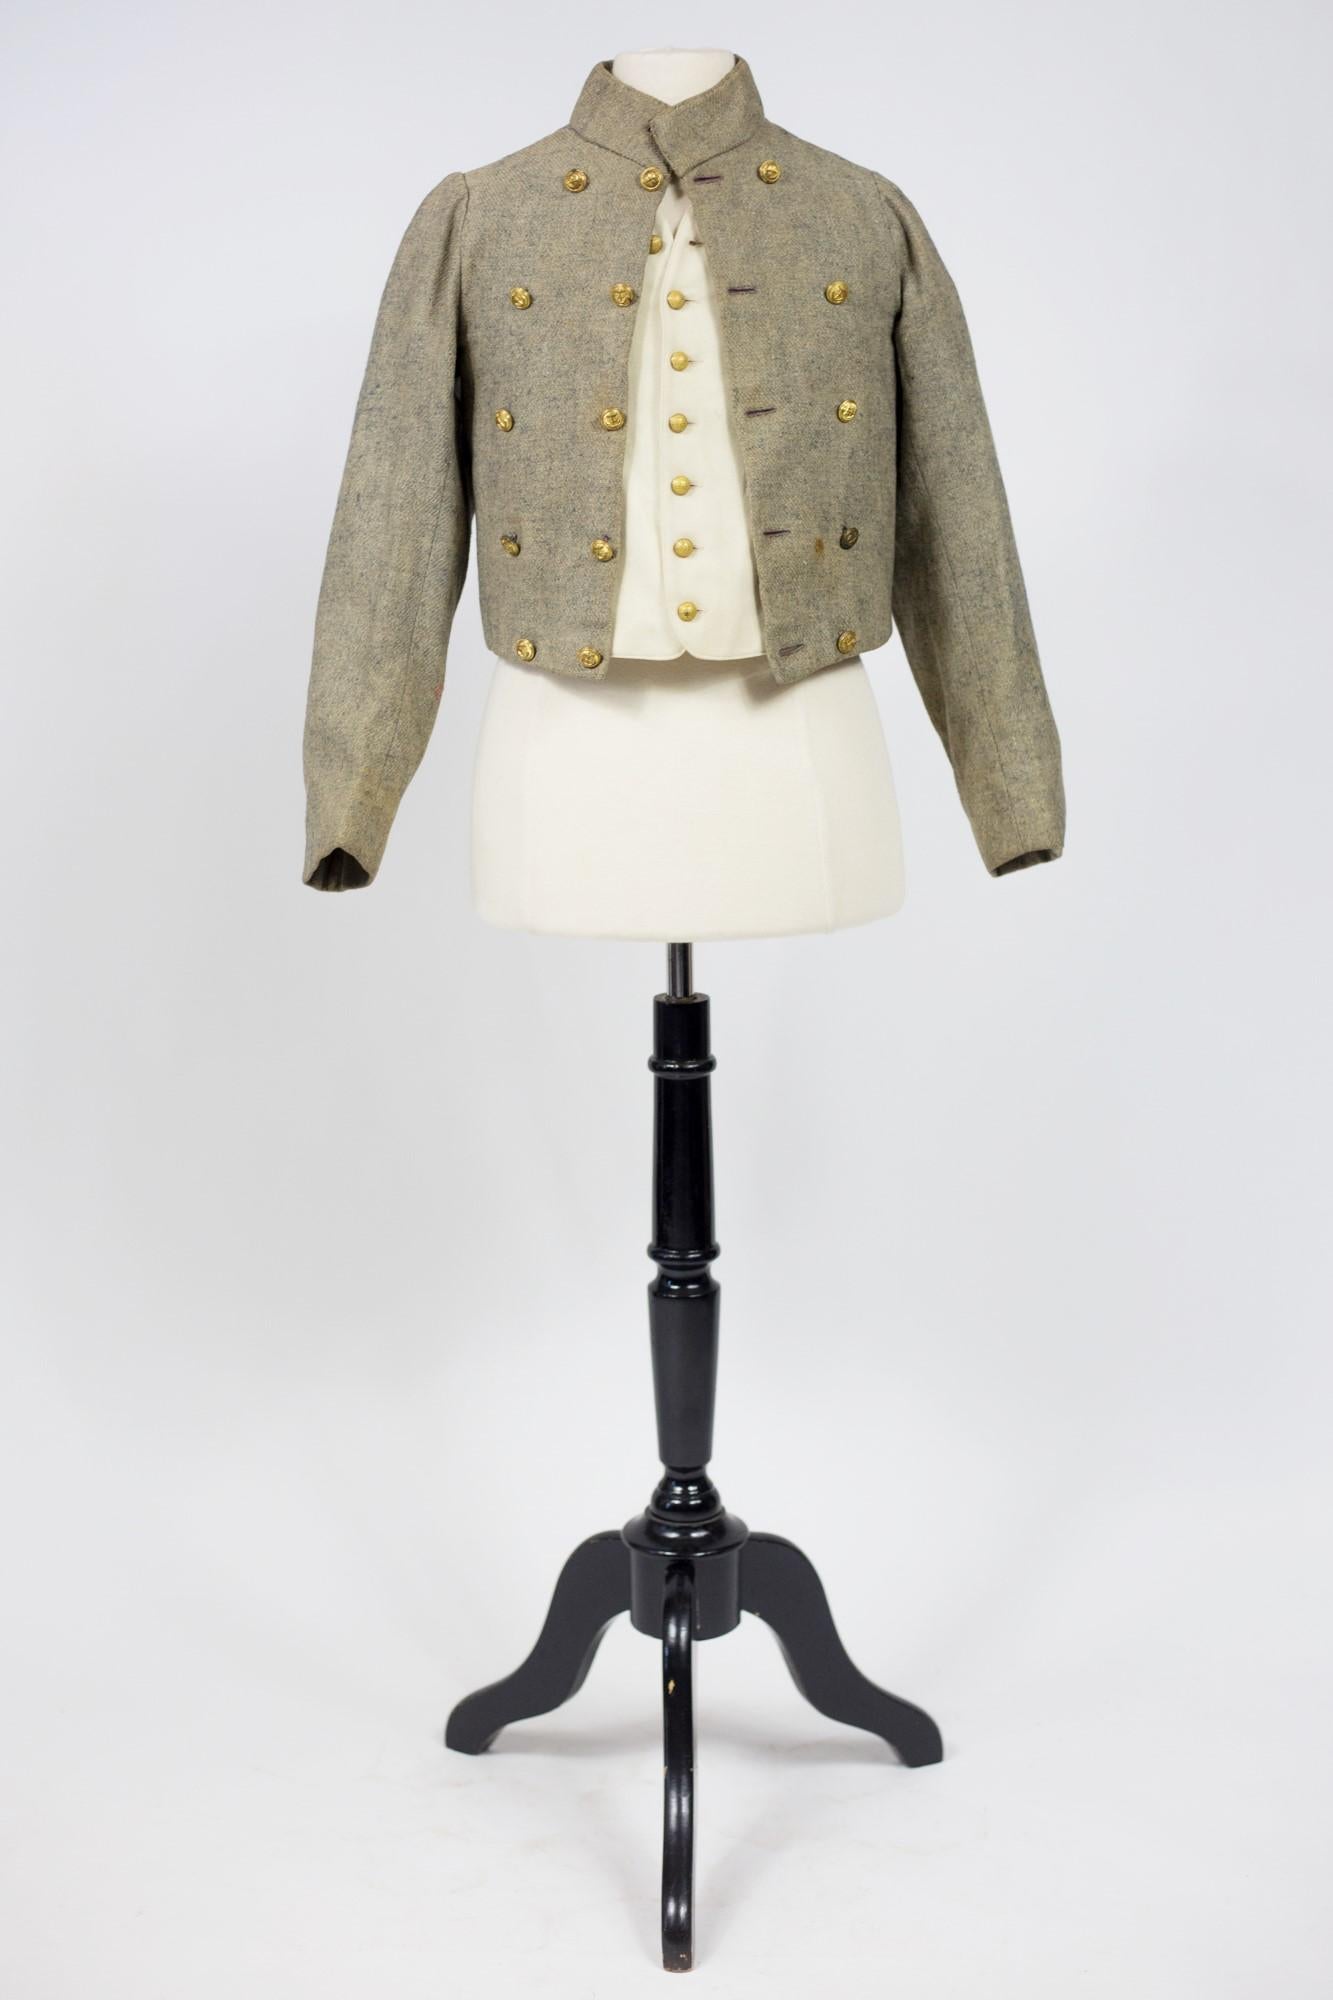 Circa 1880-1900
France
A late 19th century petrol blue and cream mottled wool boy's suit and waistcoat. Small scooped out suit with tail, officer's collar, brass button cross fastening engraved with navy ink, brown cotton twill lining. A waistcoat